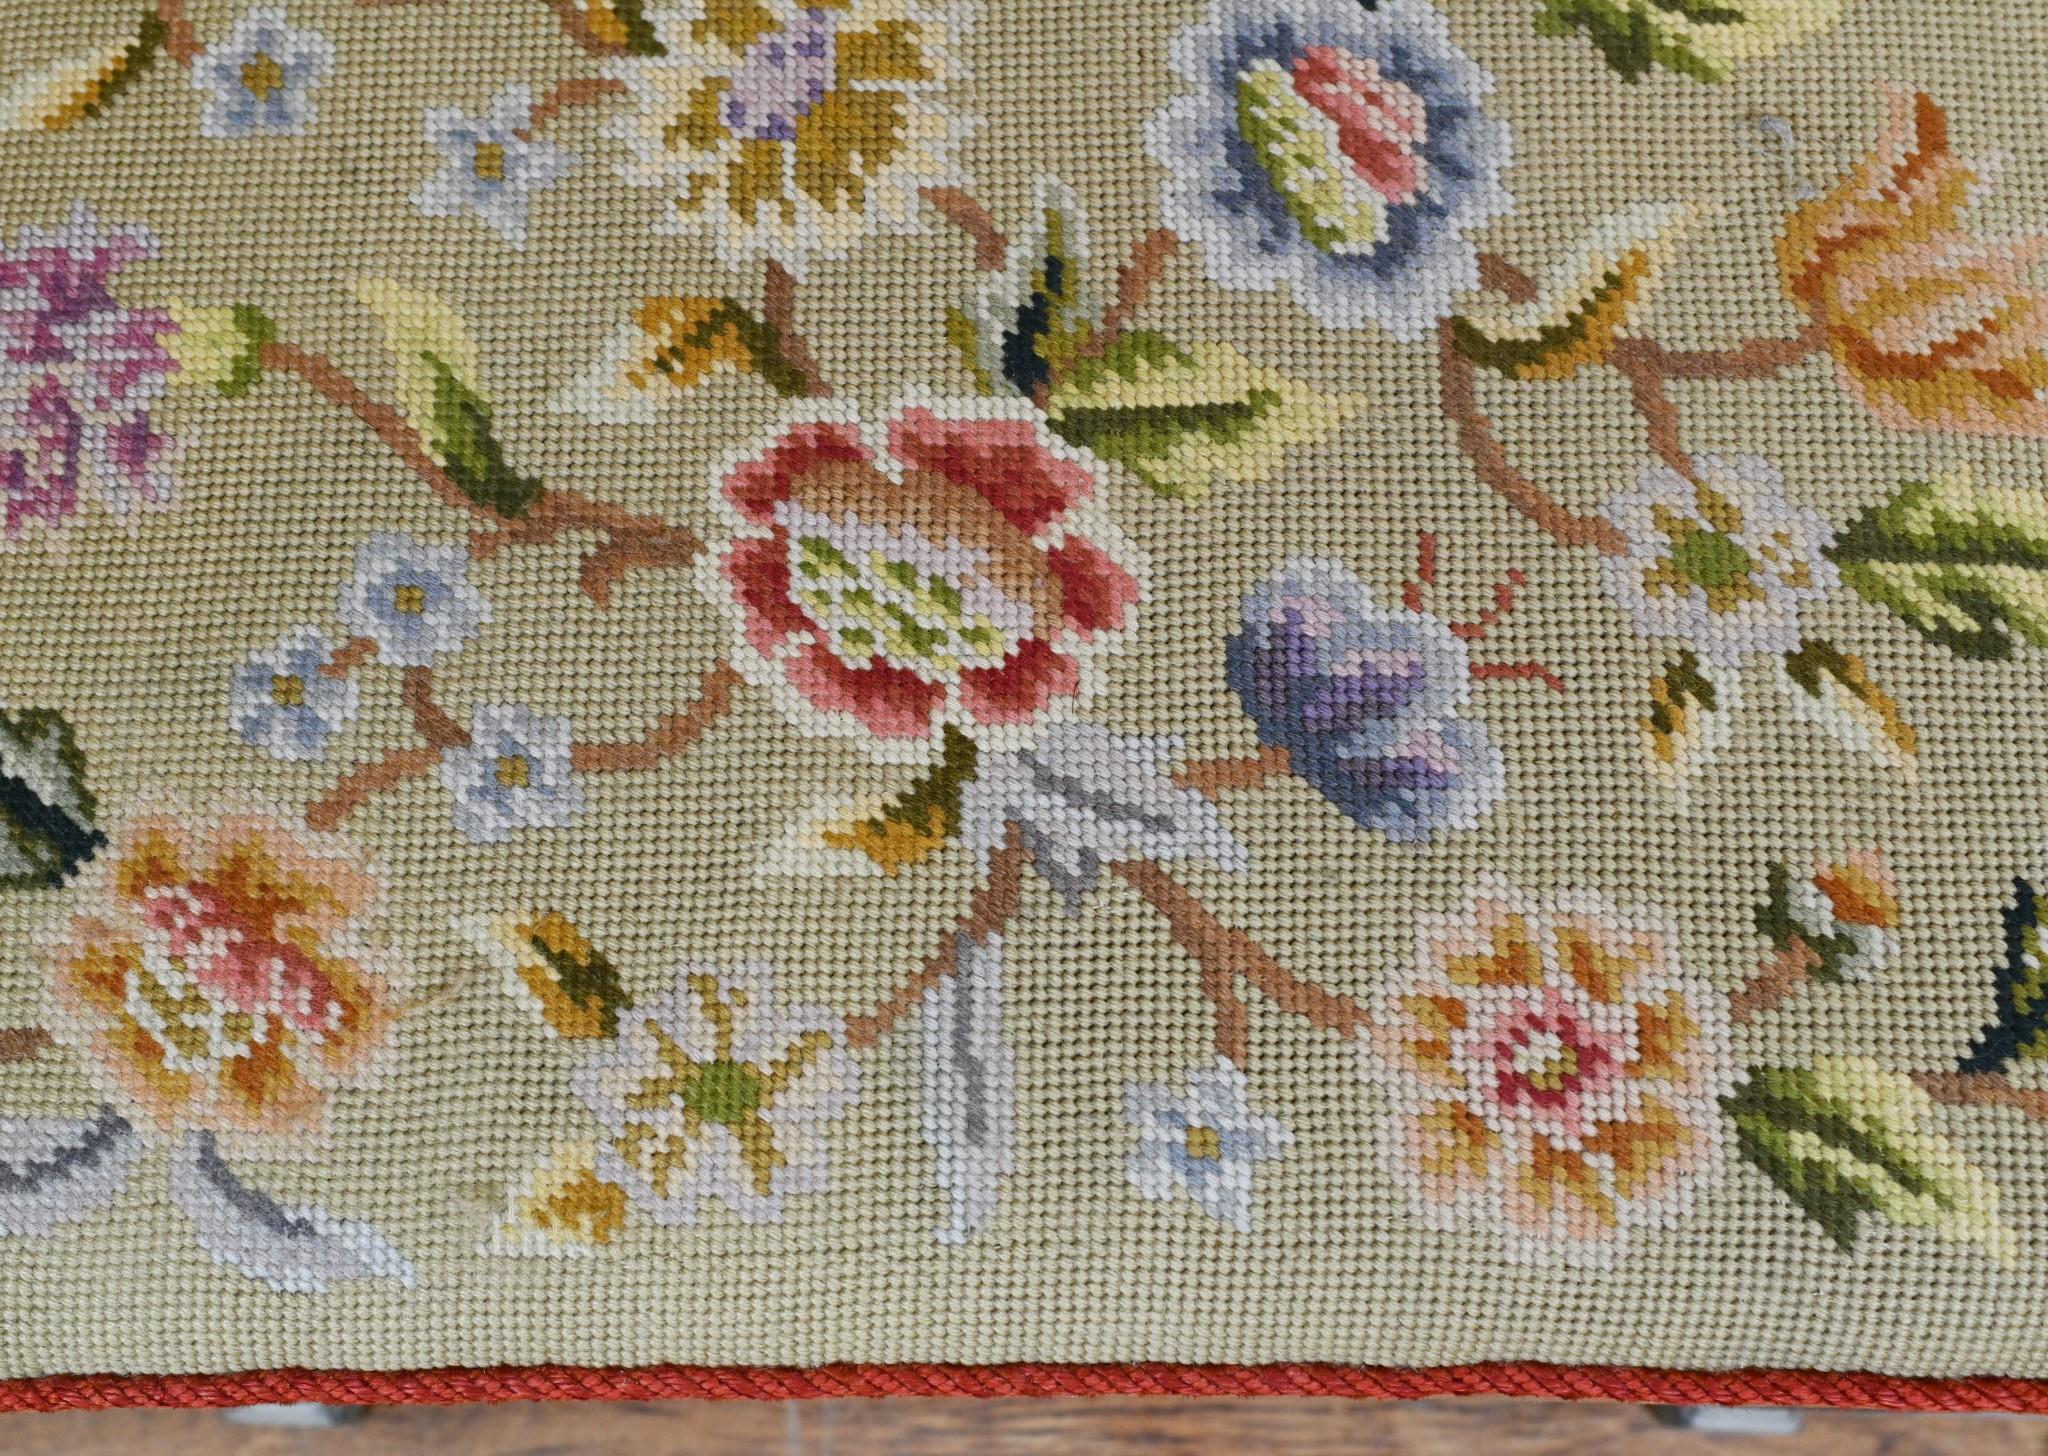 Painted Edwardian Stool Tapestry Needlepoint For Sale 3